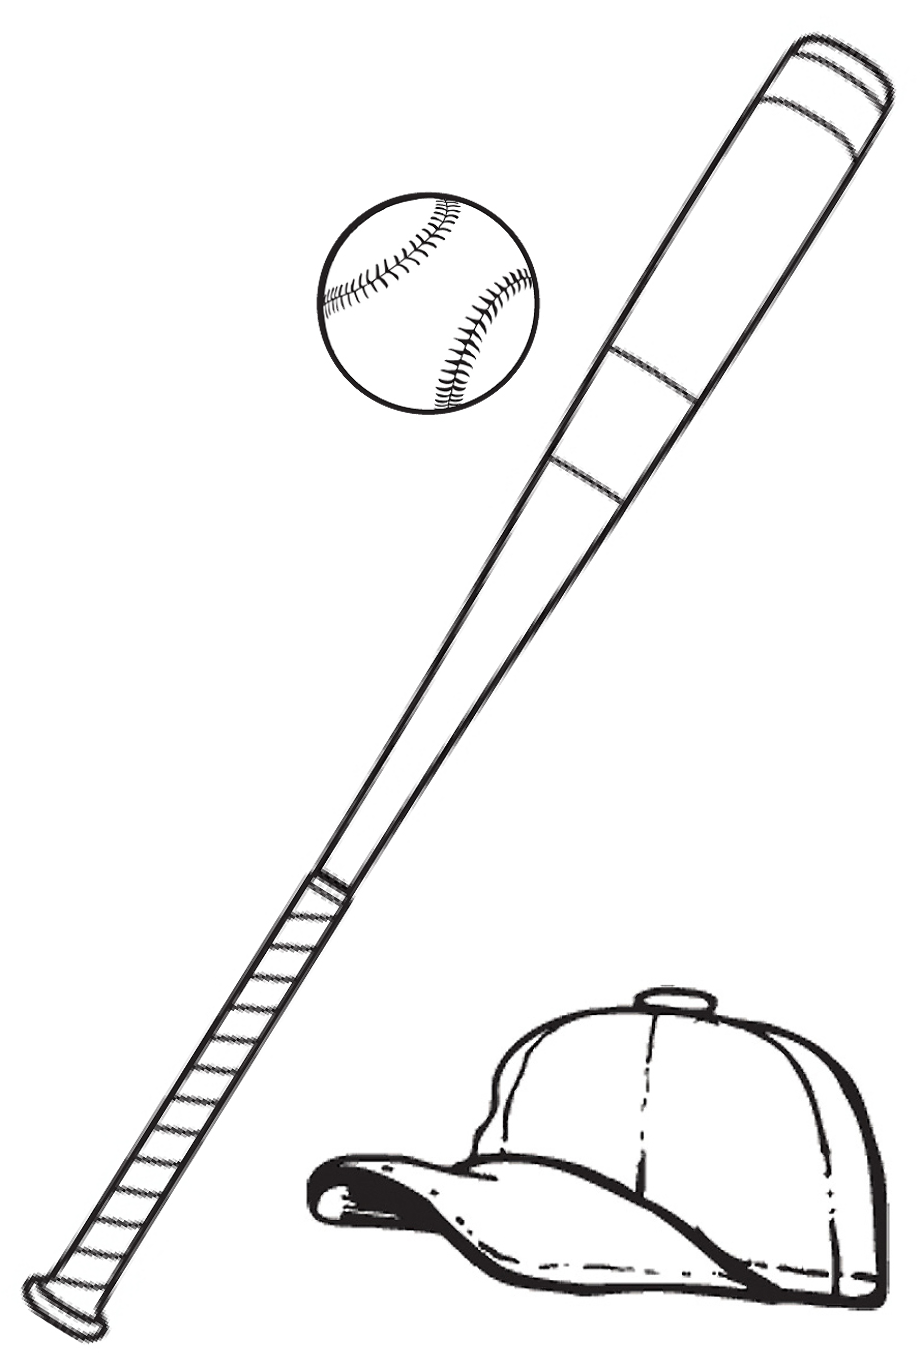 Download High Quality Baseball Bat Clipart Solid Black White